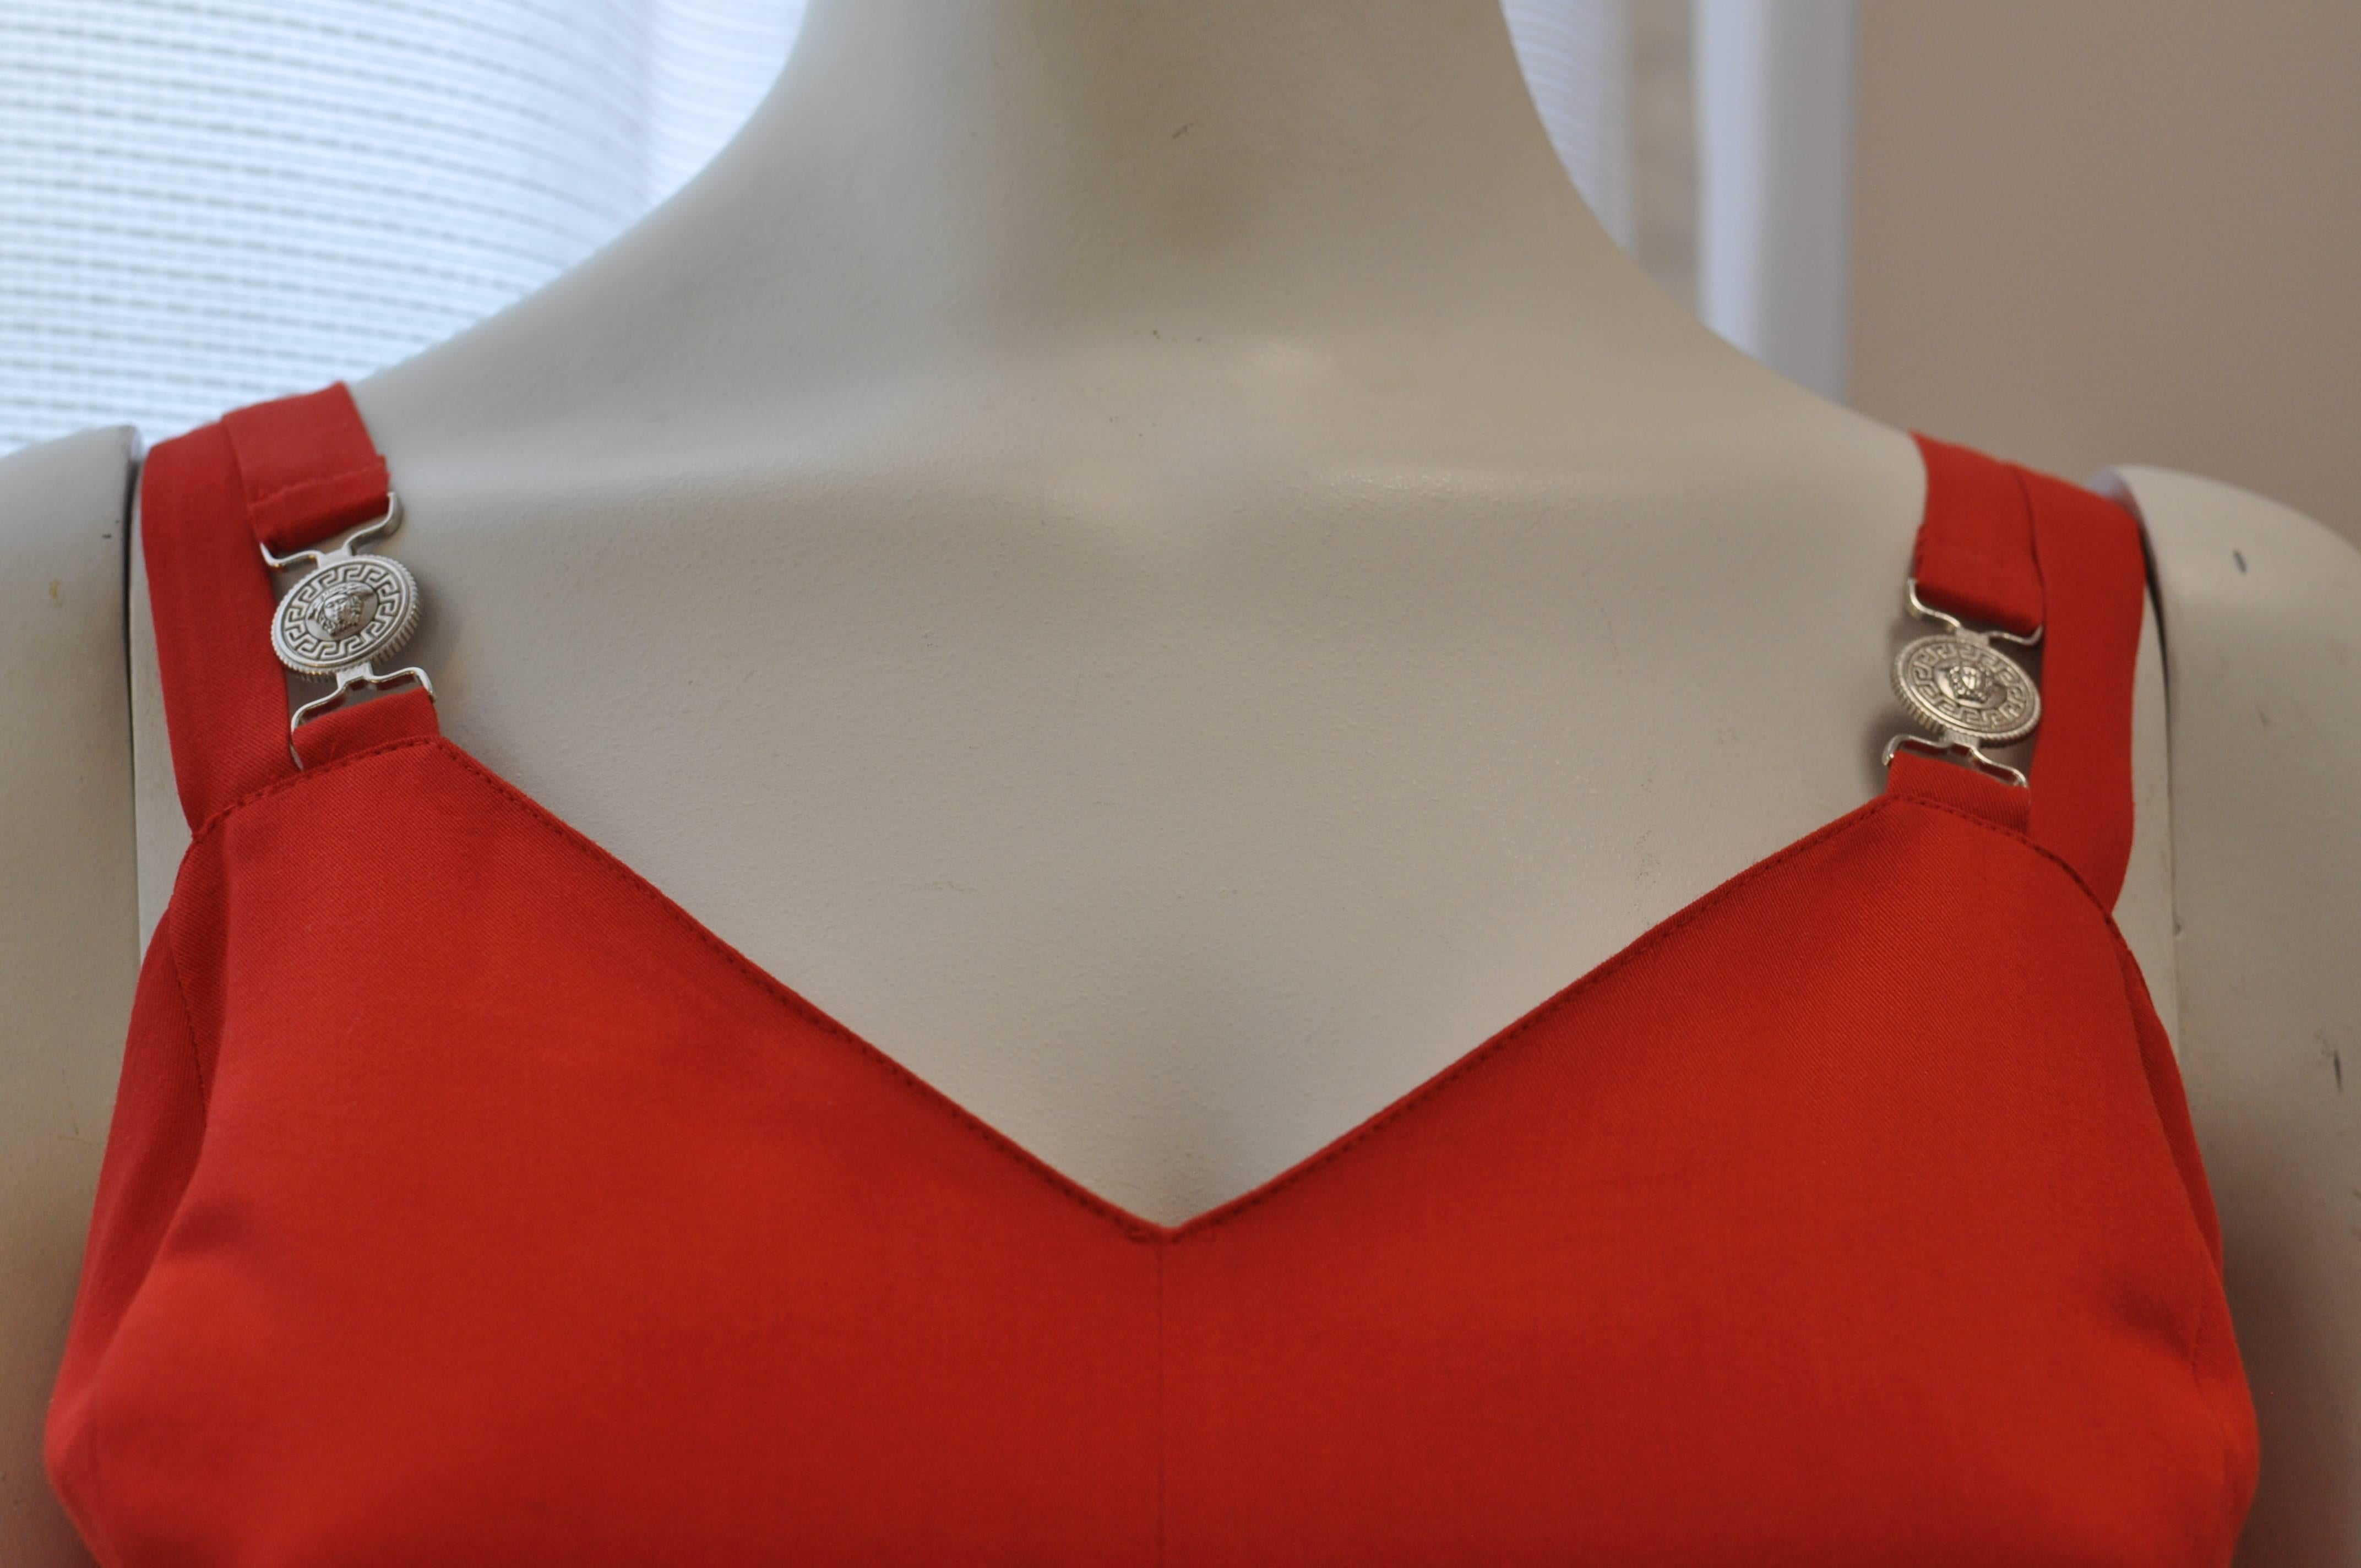 Nice A-line red dress with a v-neckline; pleated at the bottom and silver Medusa strap tabs front and back (with parallel plain straps). 

The material is viscose.